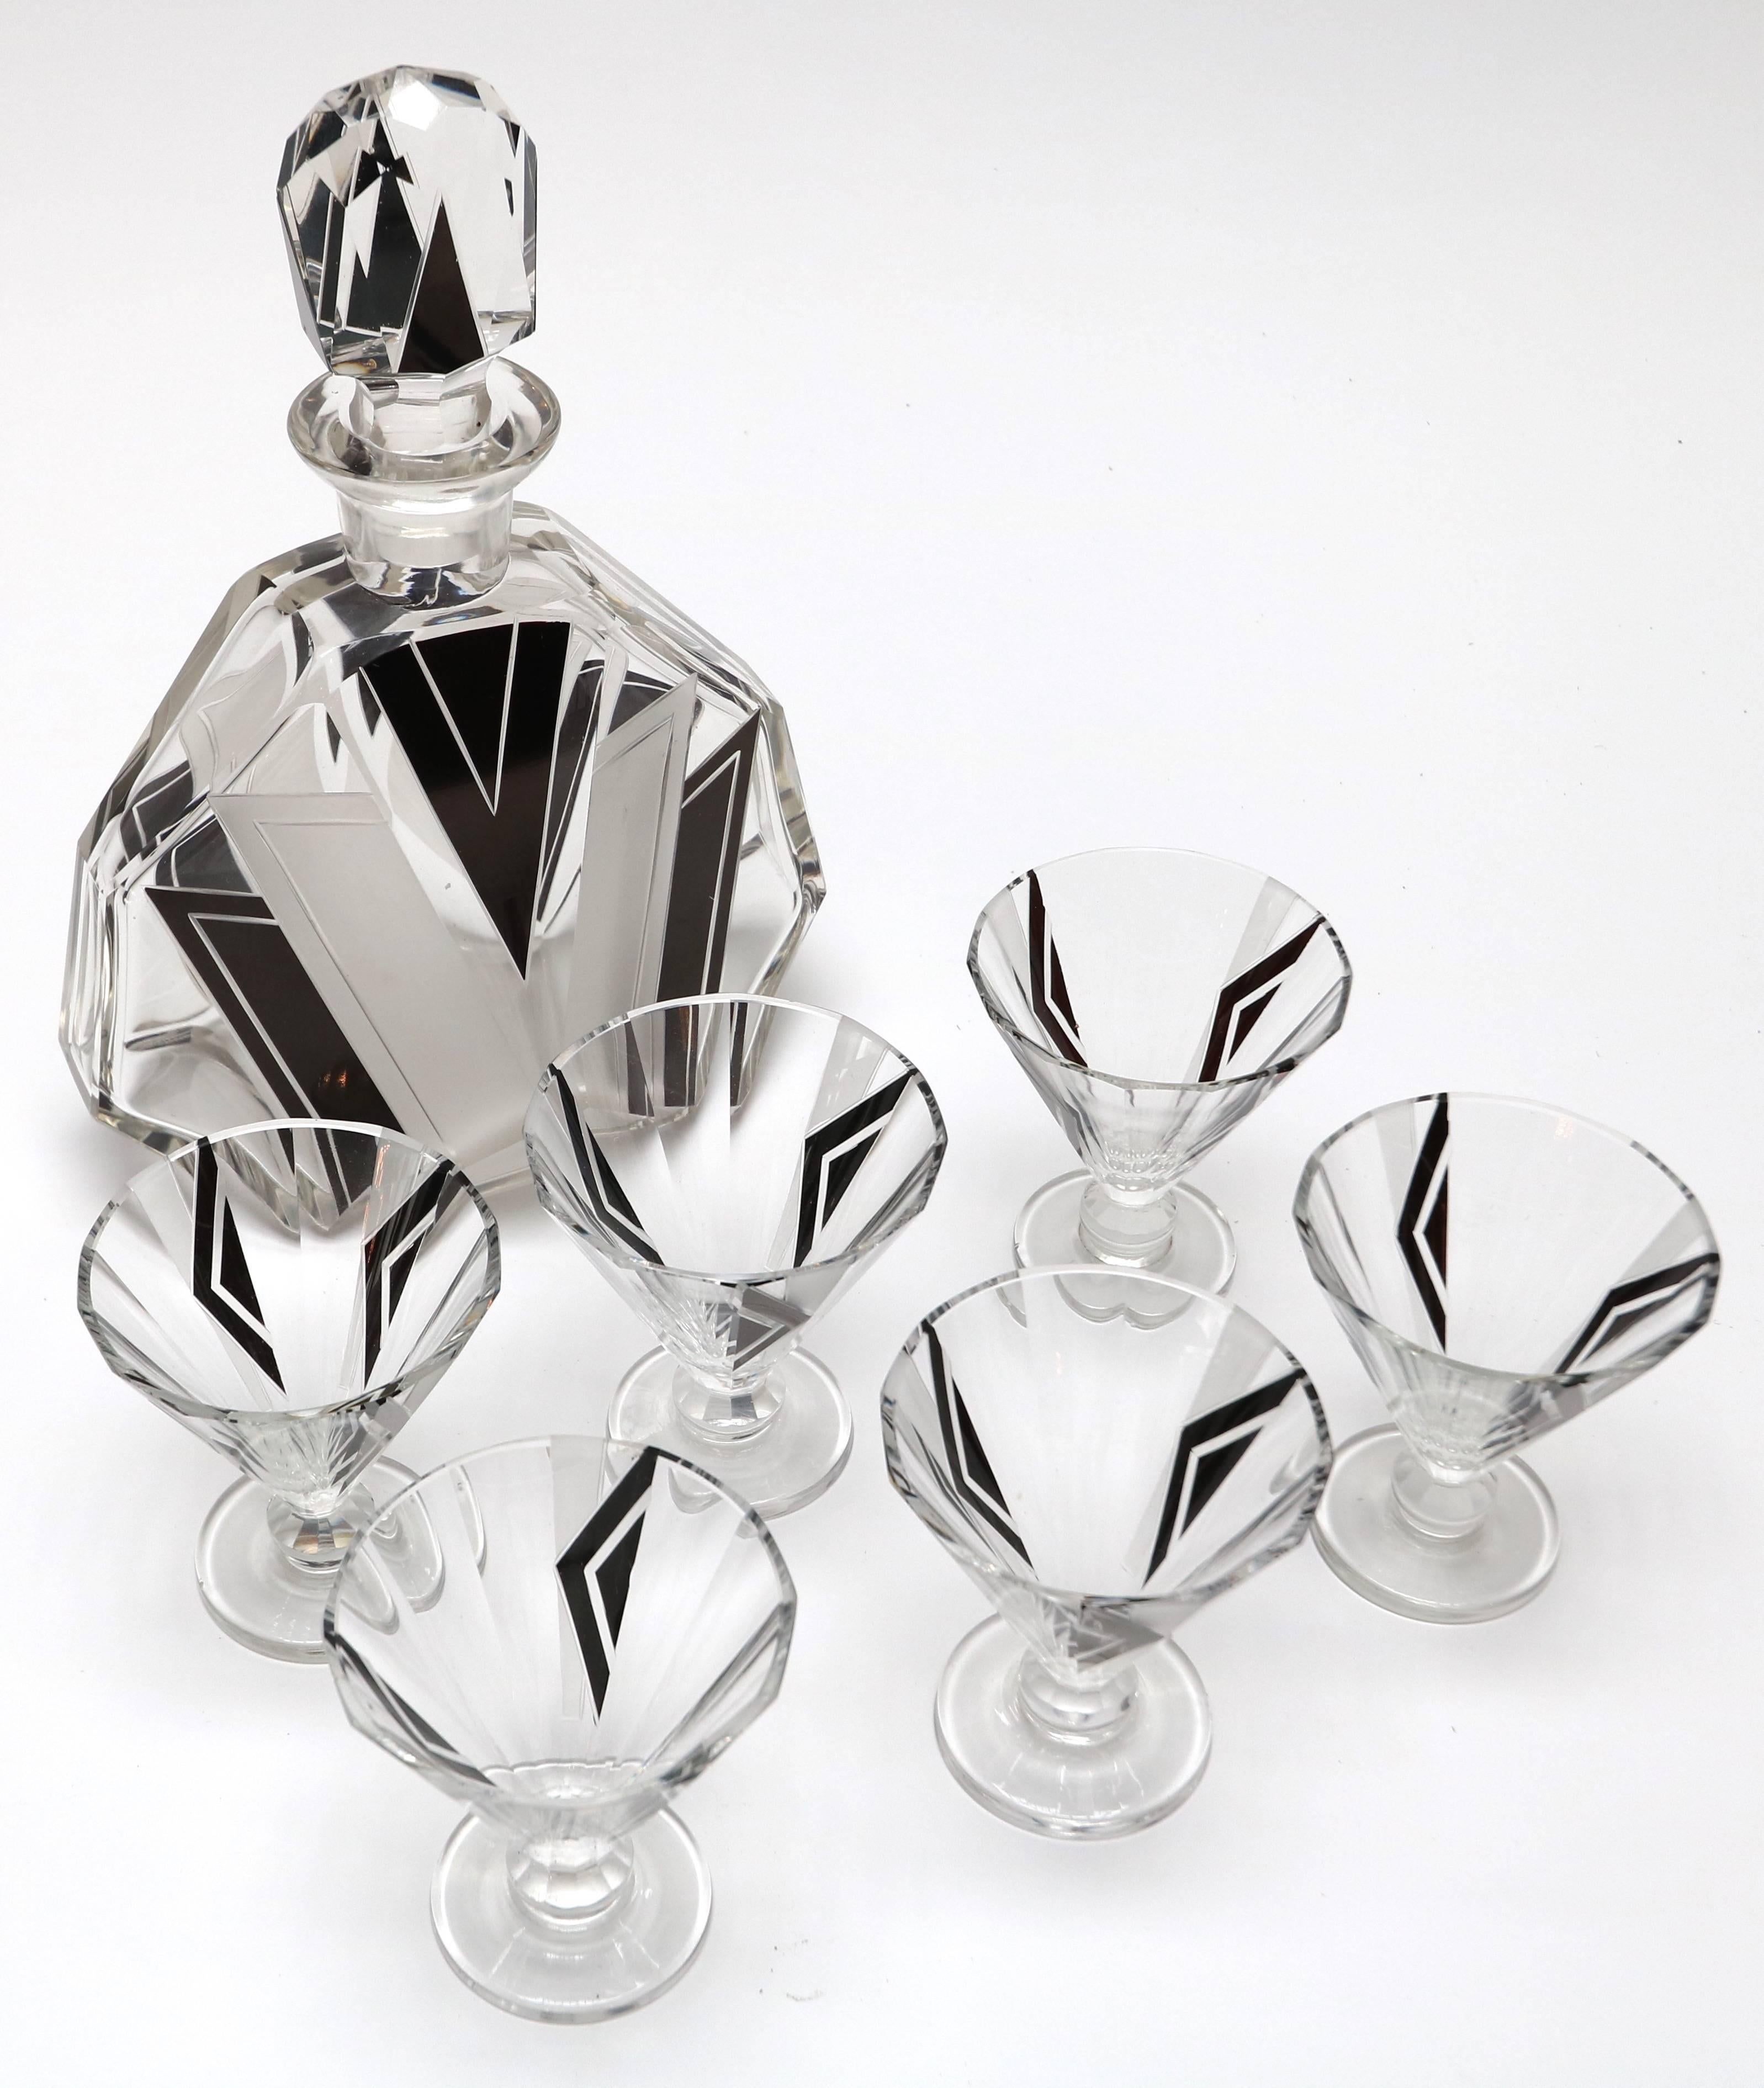 Black and silver Art Deco decanter set from the 1930s with six glasses.